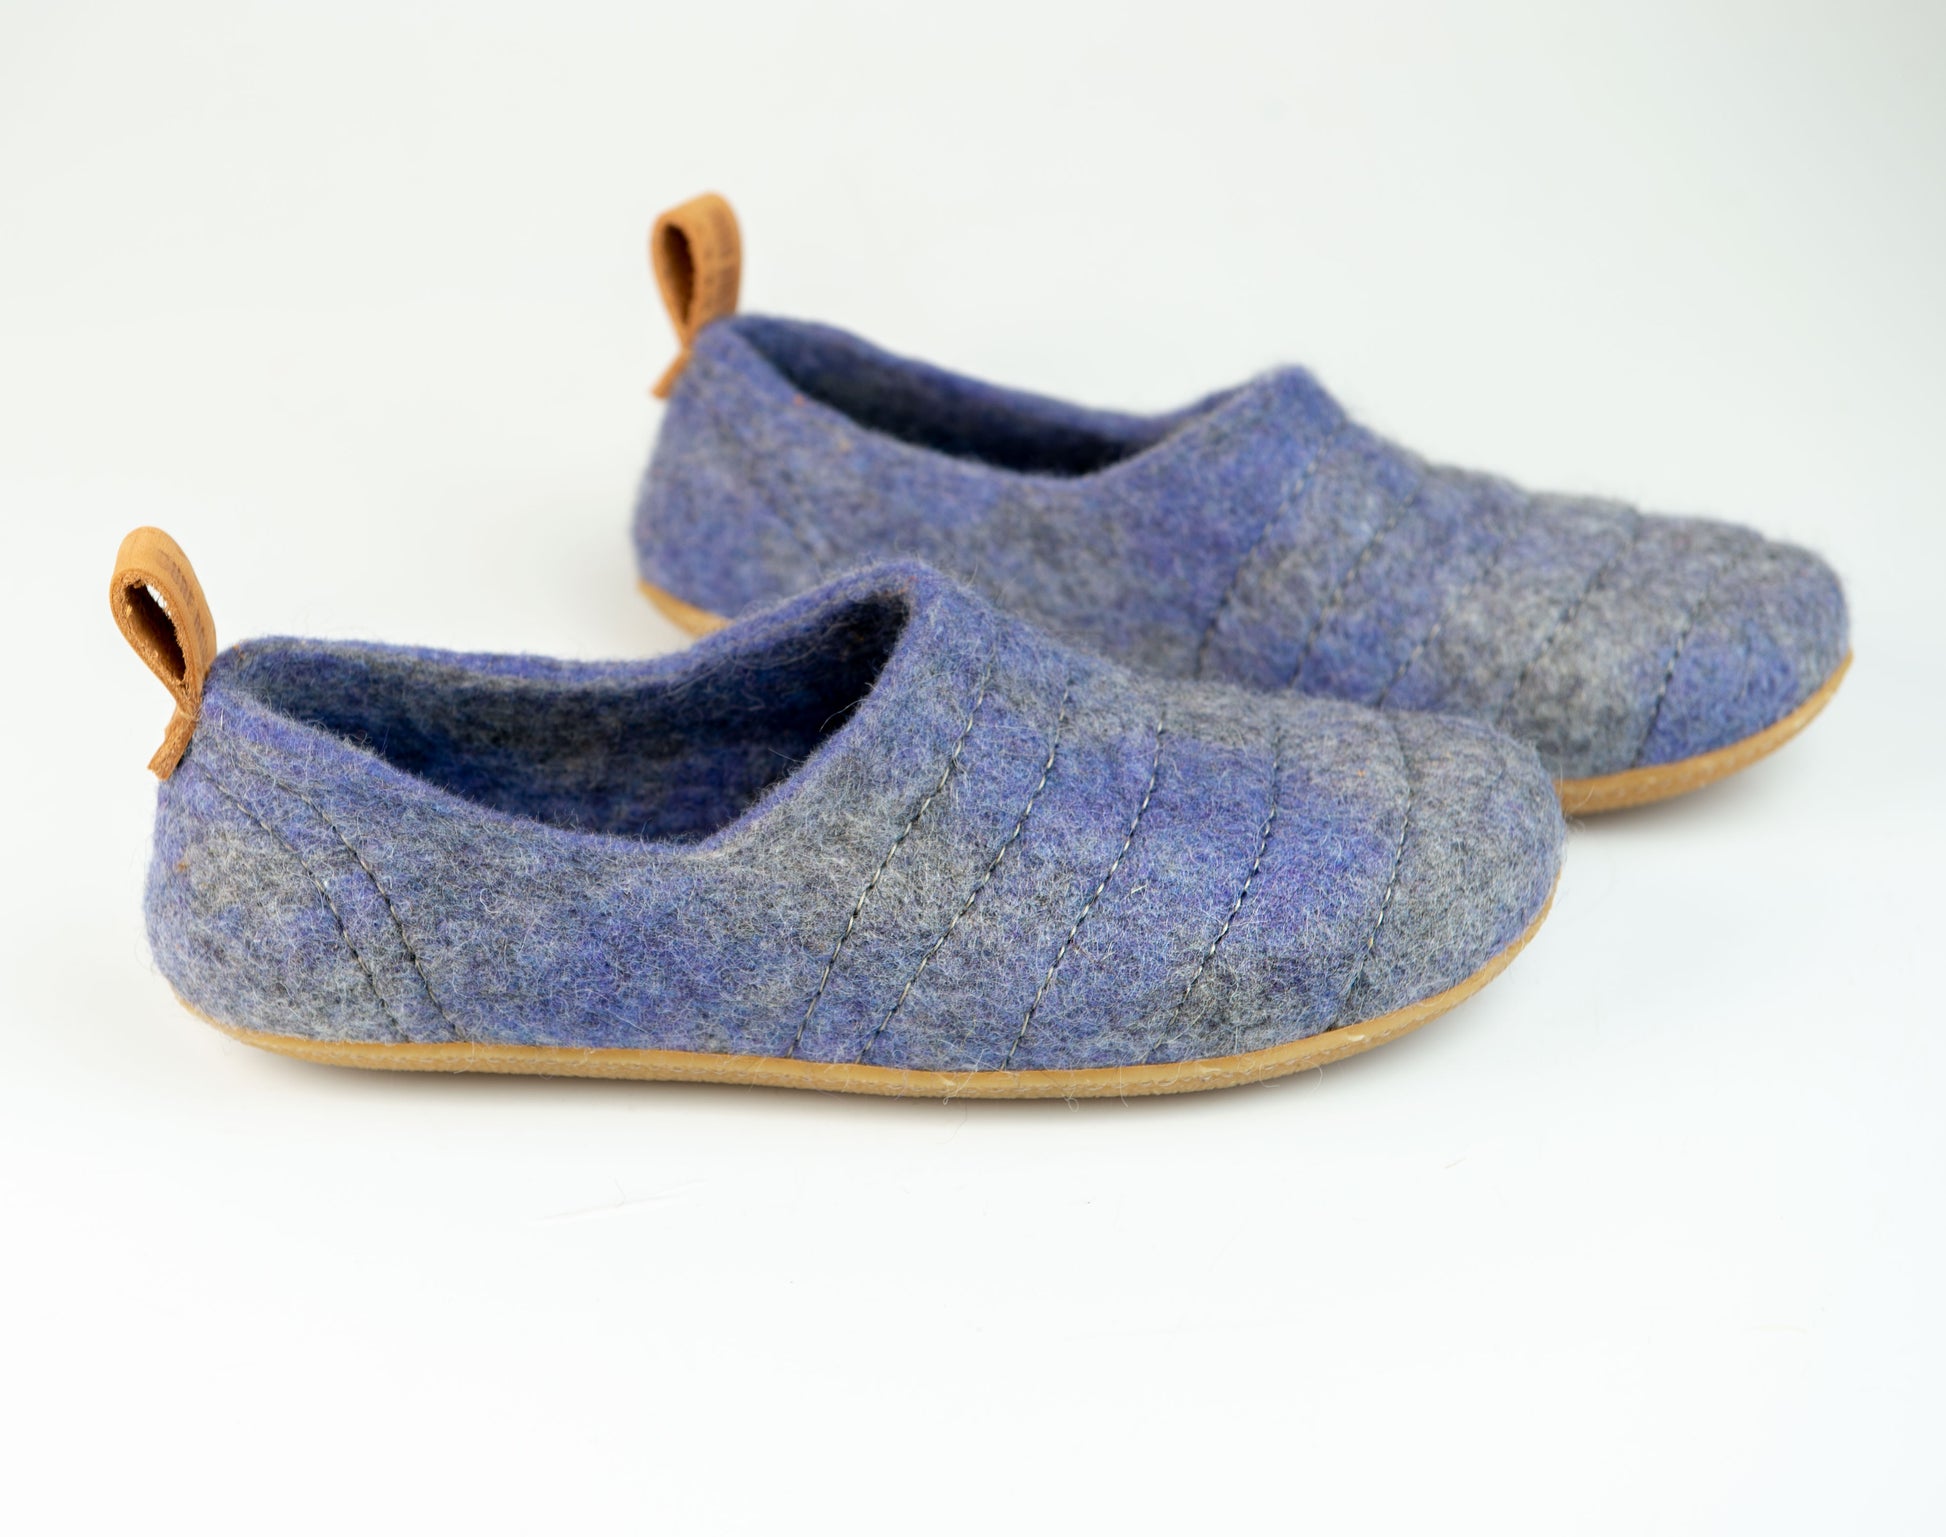 Warm Woolen House Shoes for Women with Non Slippery Hand-stitched Soles